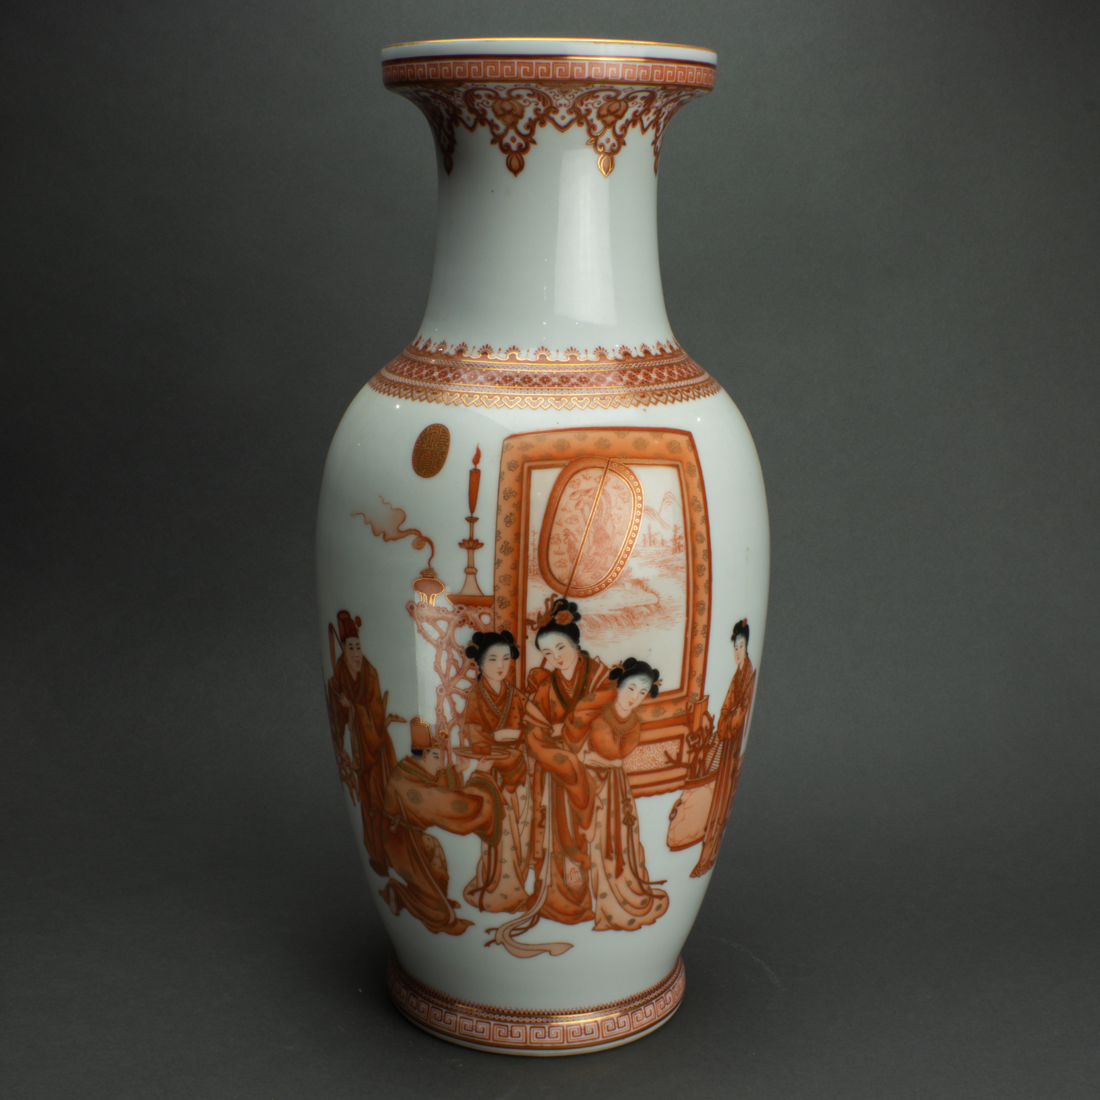 IRON-RED DECORATED VASE, HEIGHT 18.